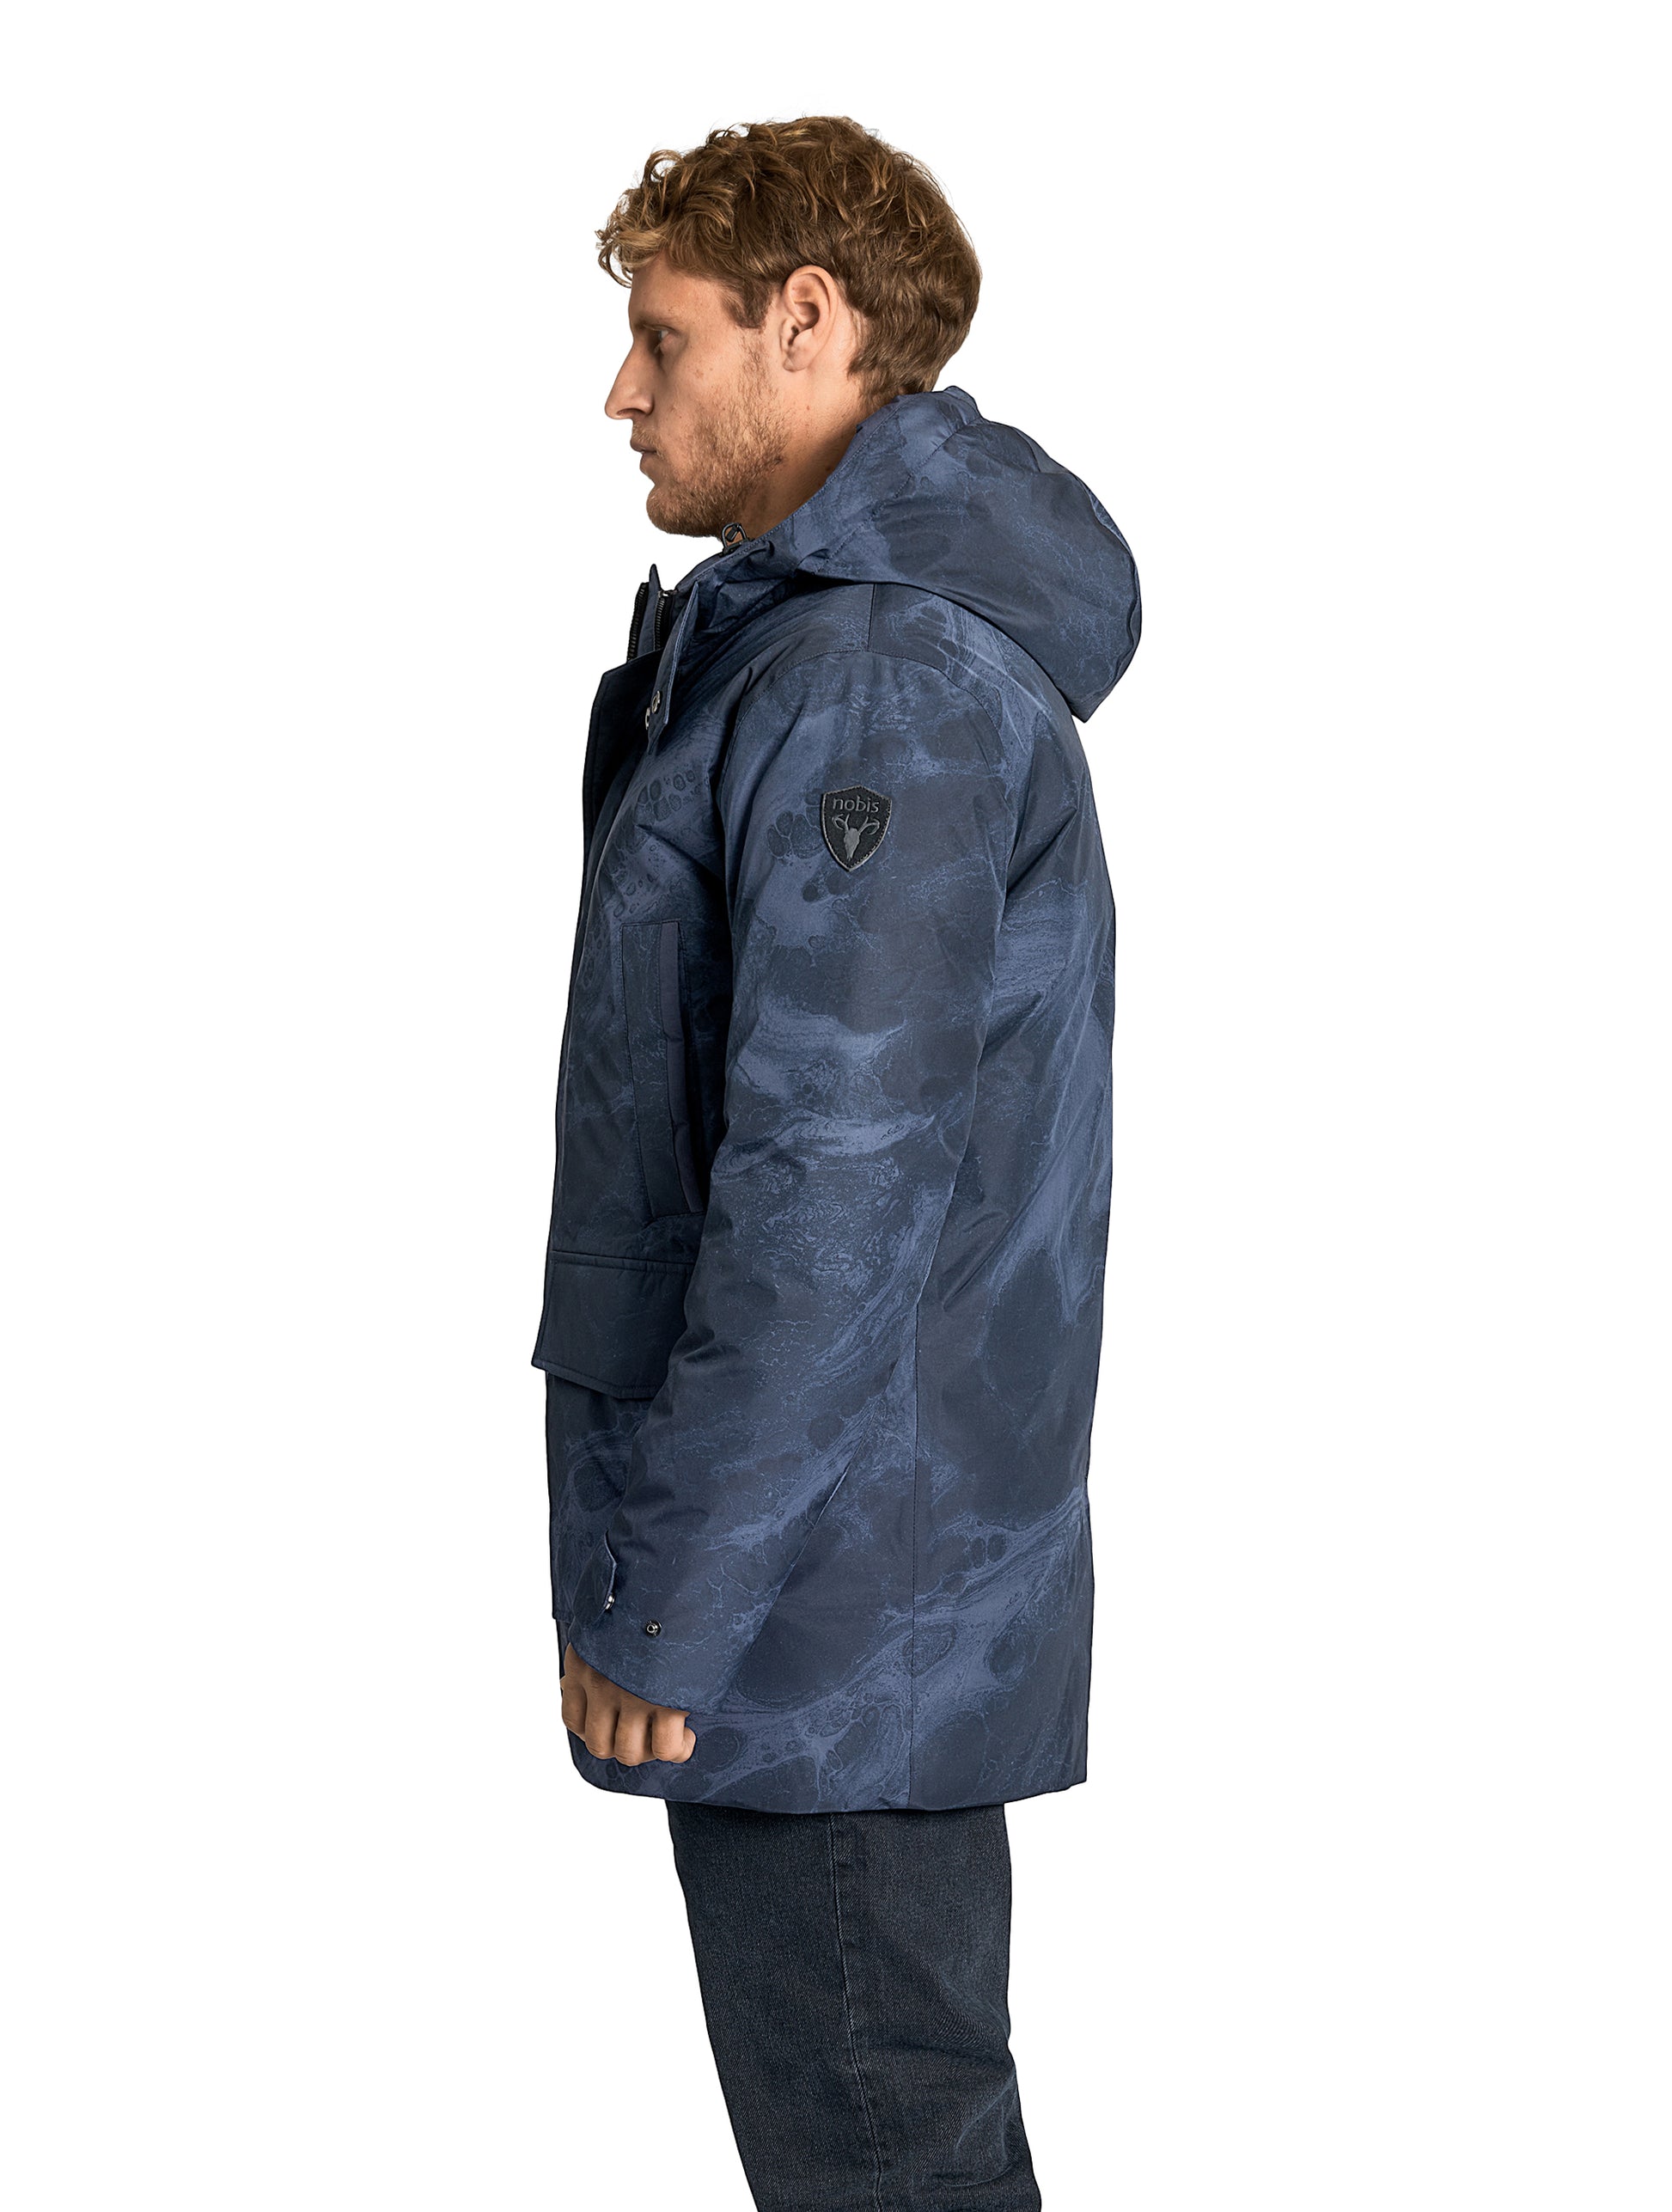 Kason Men's Light Down Parka in thigh length, premium 3-ply micro denier and stretch ripstop fabrication, Premium Canadian origin White Duck Down insulation, non-removable down-filled hood, two-way centre-front zipper, magnetic closure wind flap, fleece-lined pockets at chest and waist, flap pockets at waist, pit zipper vents, in Navy